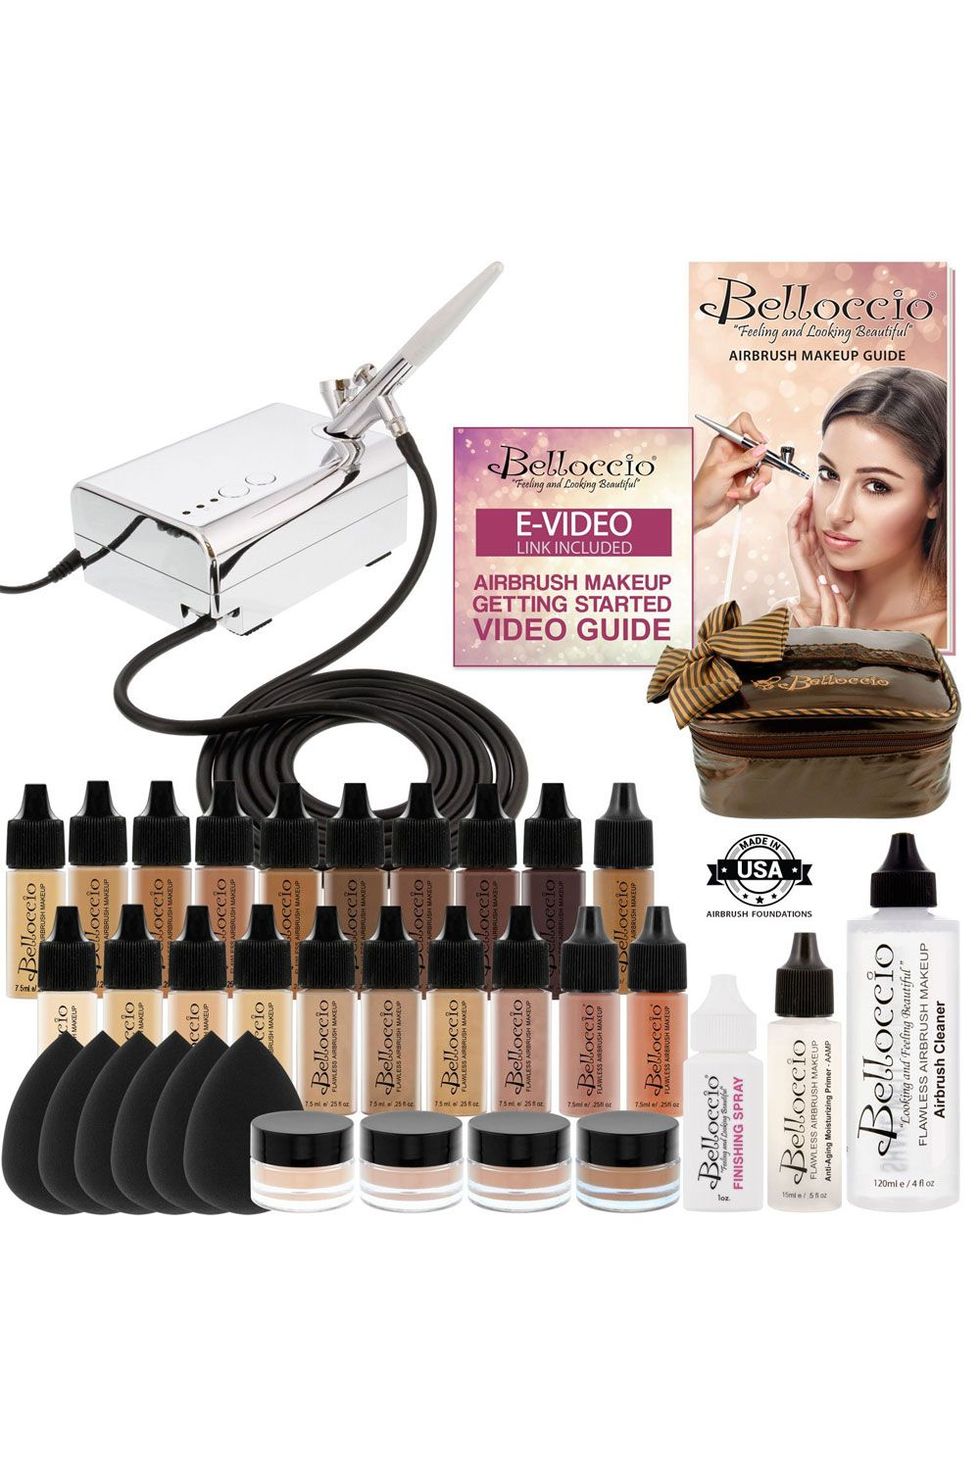 15 Best Airbrush Makeup Kits for Perfect Skin in 2023